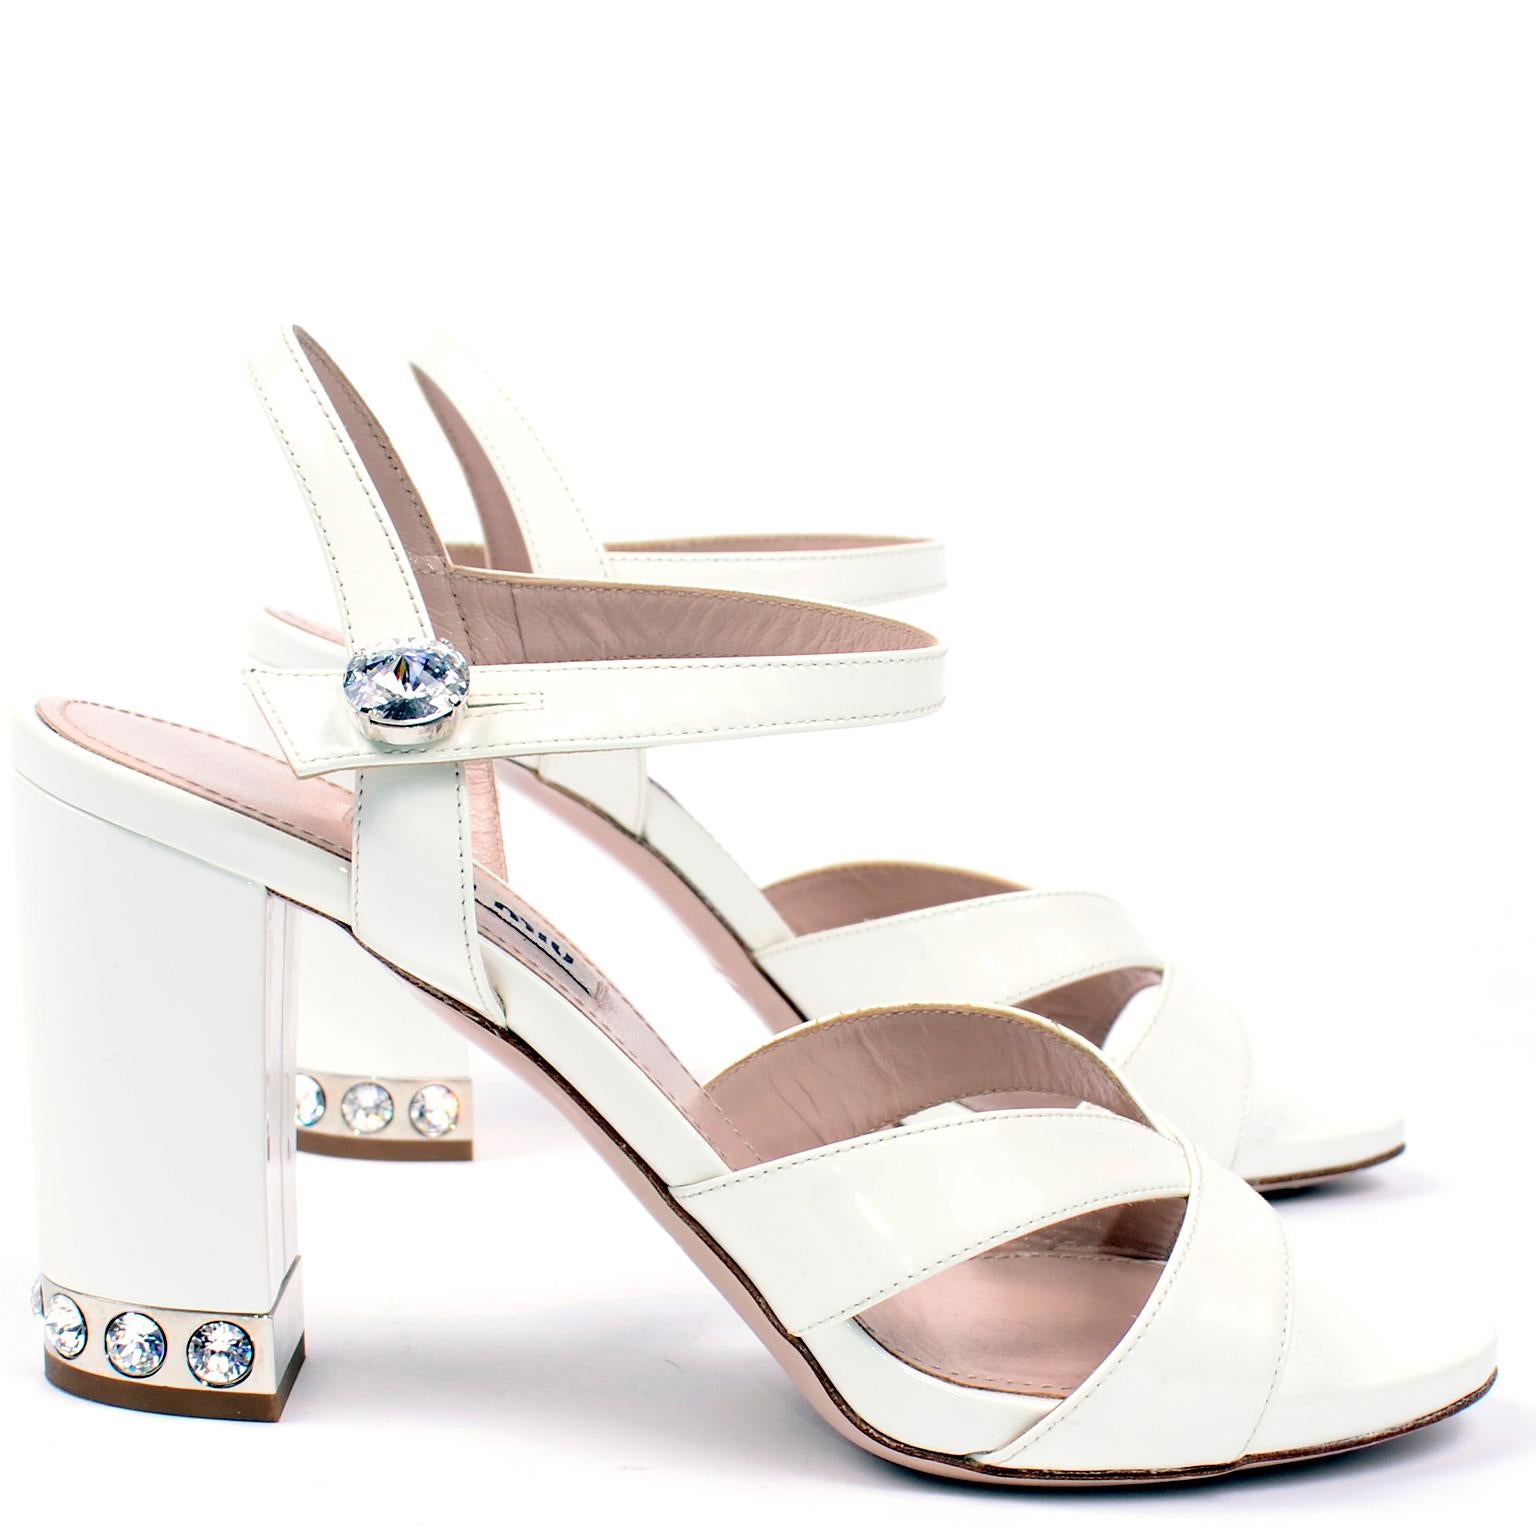 These are white leather strappy heeled open toe shoes from Miu Miu. There is a single ankle strap secured by a rhinestone button and the base of the heel has a silver tone plate with the same rhinestones around the heels. The tops of the shoes have